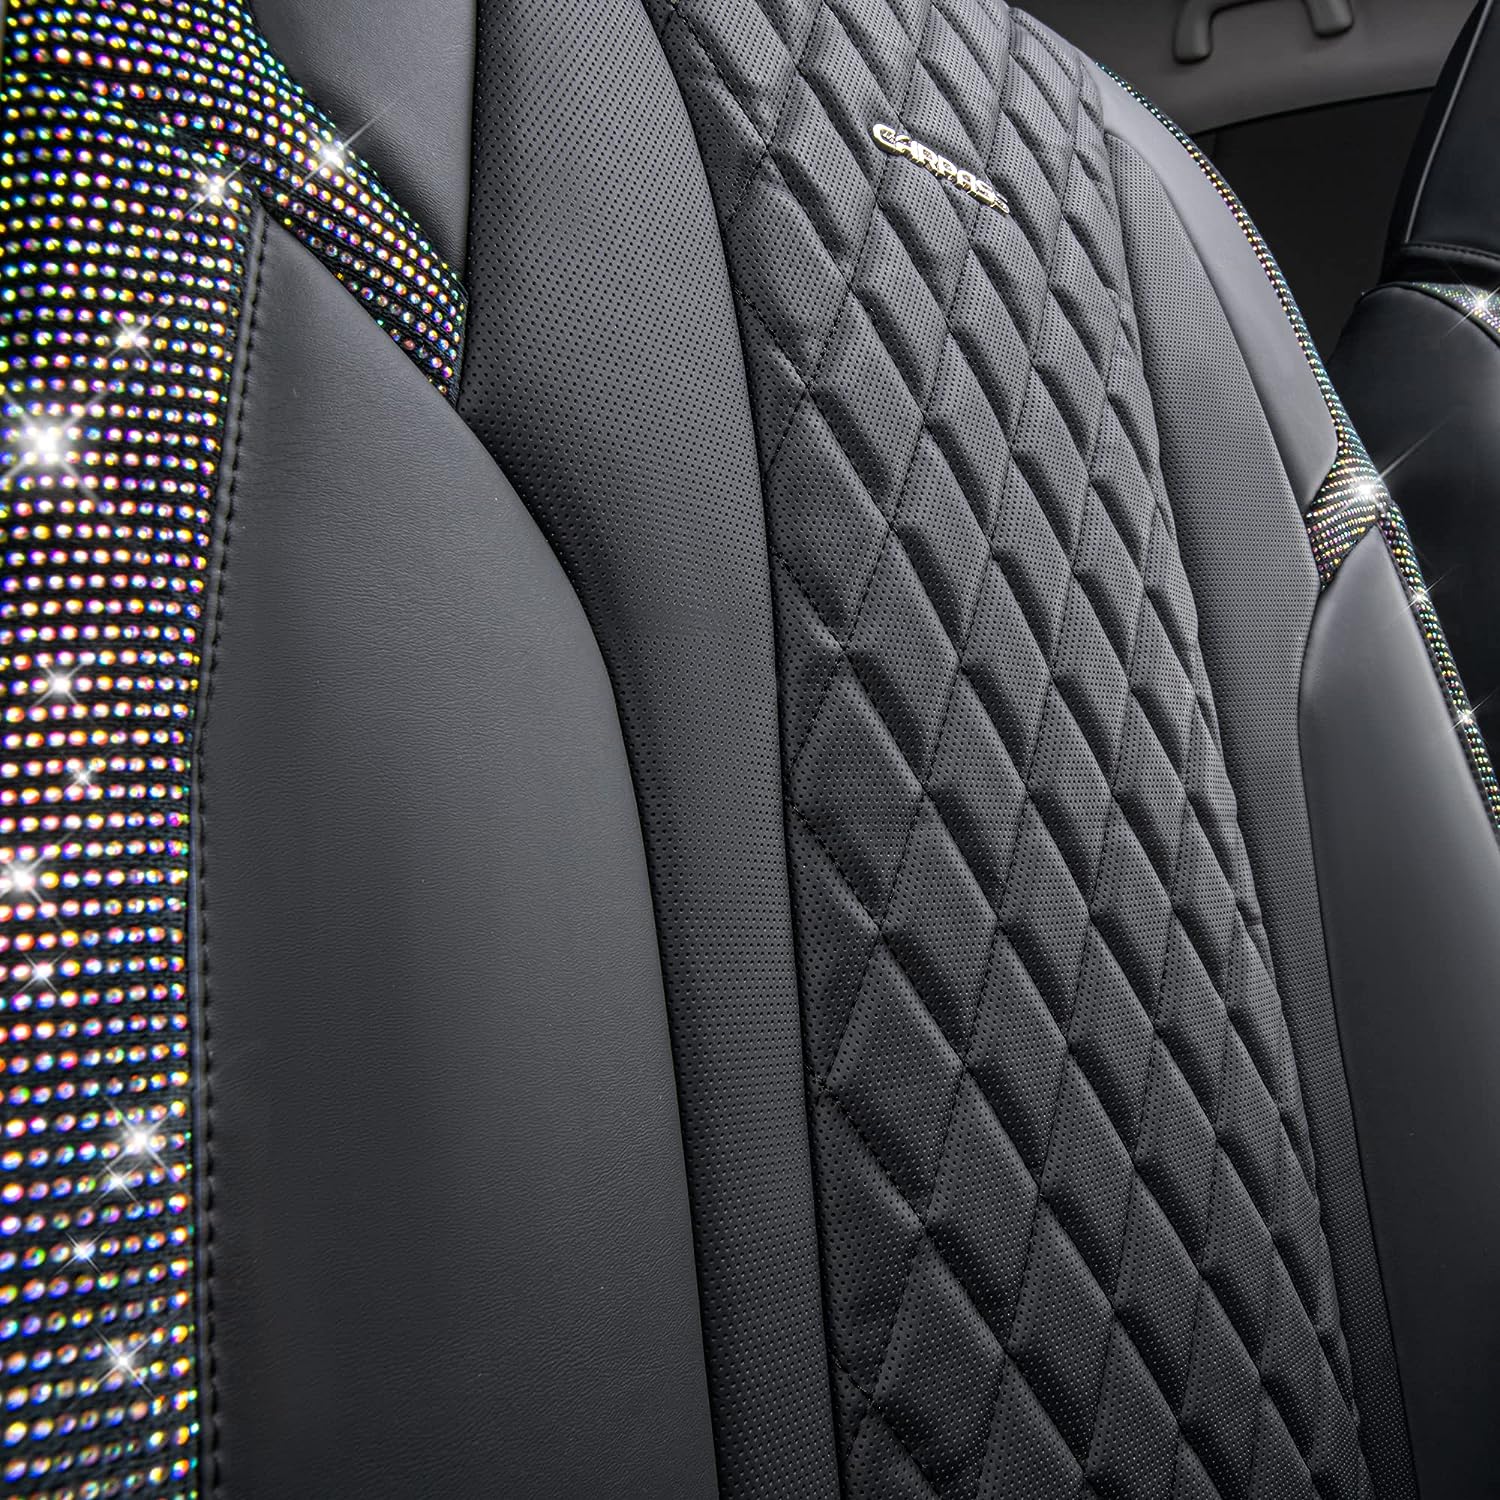 CAR PASS Iridescent Diamond Nappa Calfskin Leather Cushioned,Bling Seat Covers & Steering Cover & Car Floor Mats Universal Fit for Auto SUV Sedan,Sparkly Glitter Shining Rhinestone